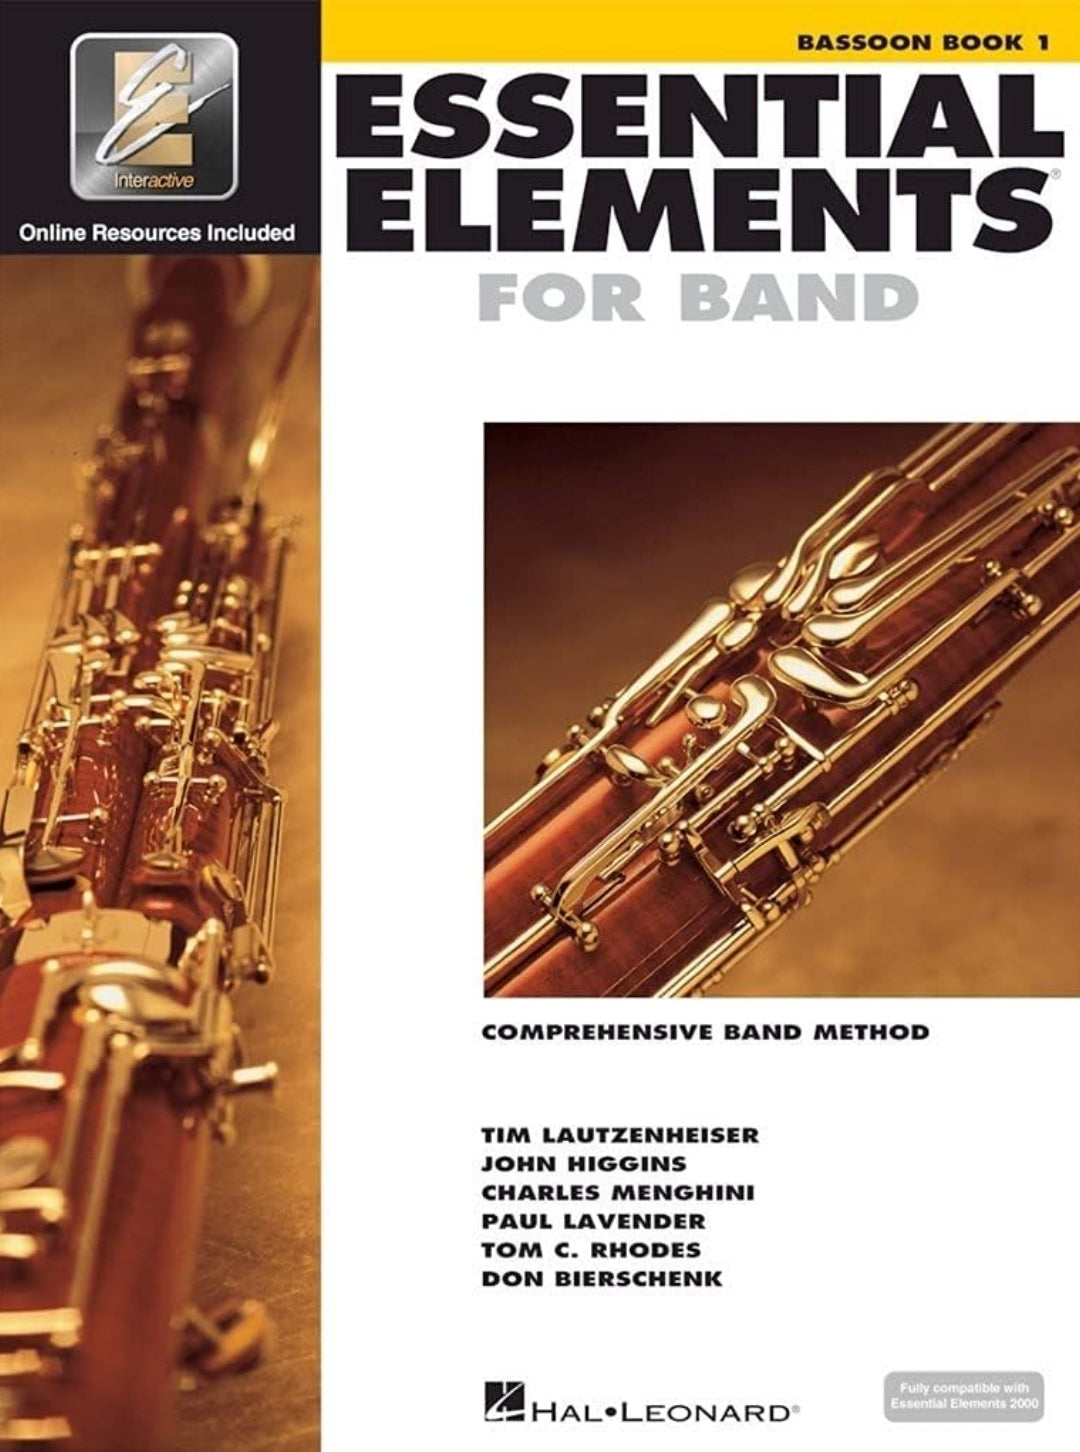 Essential Elements for Band (Bassoon Book 1)